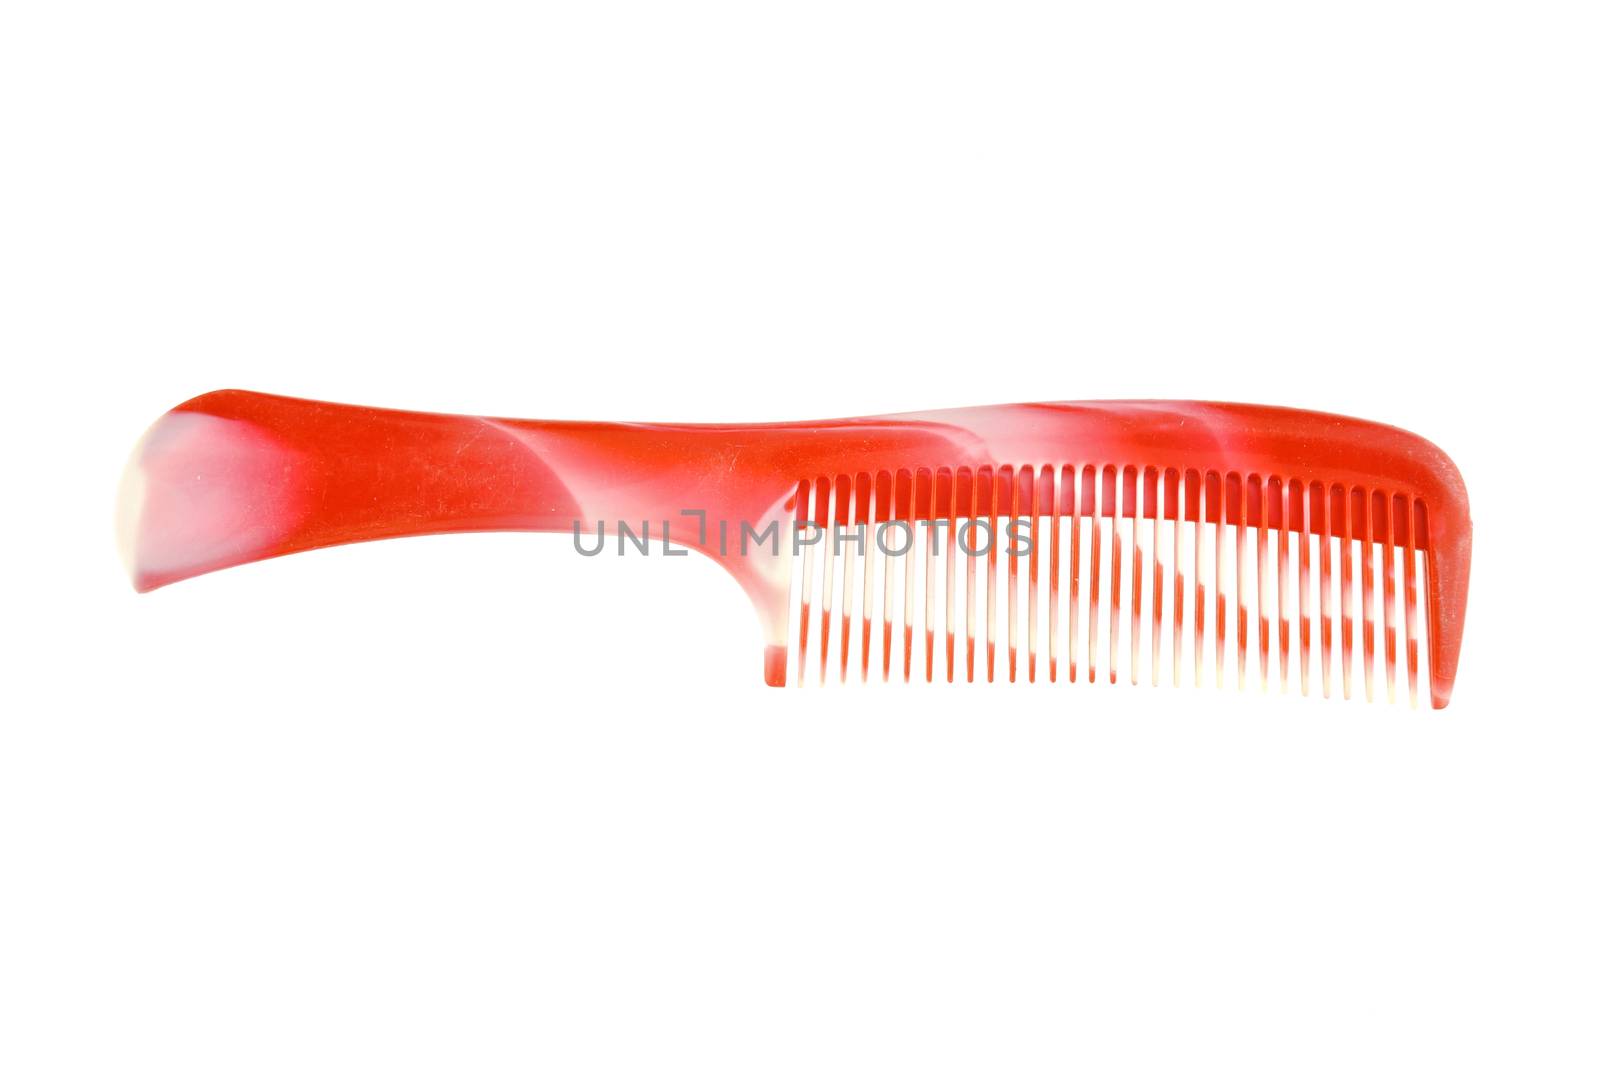 Red and white plastic comb placed isolated with white background.